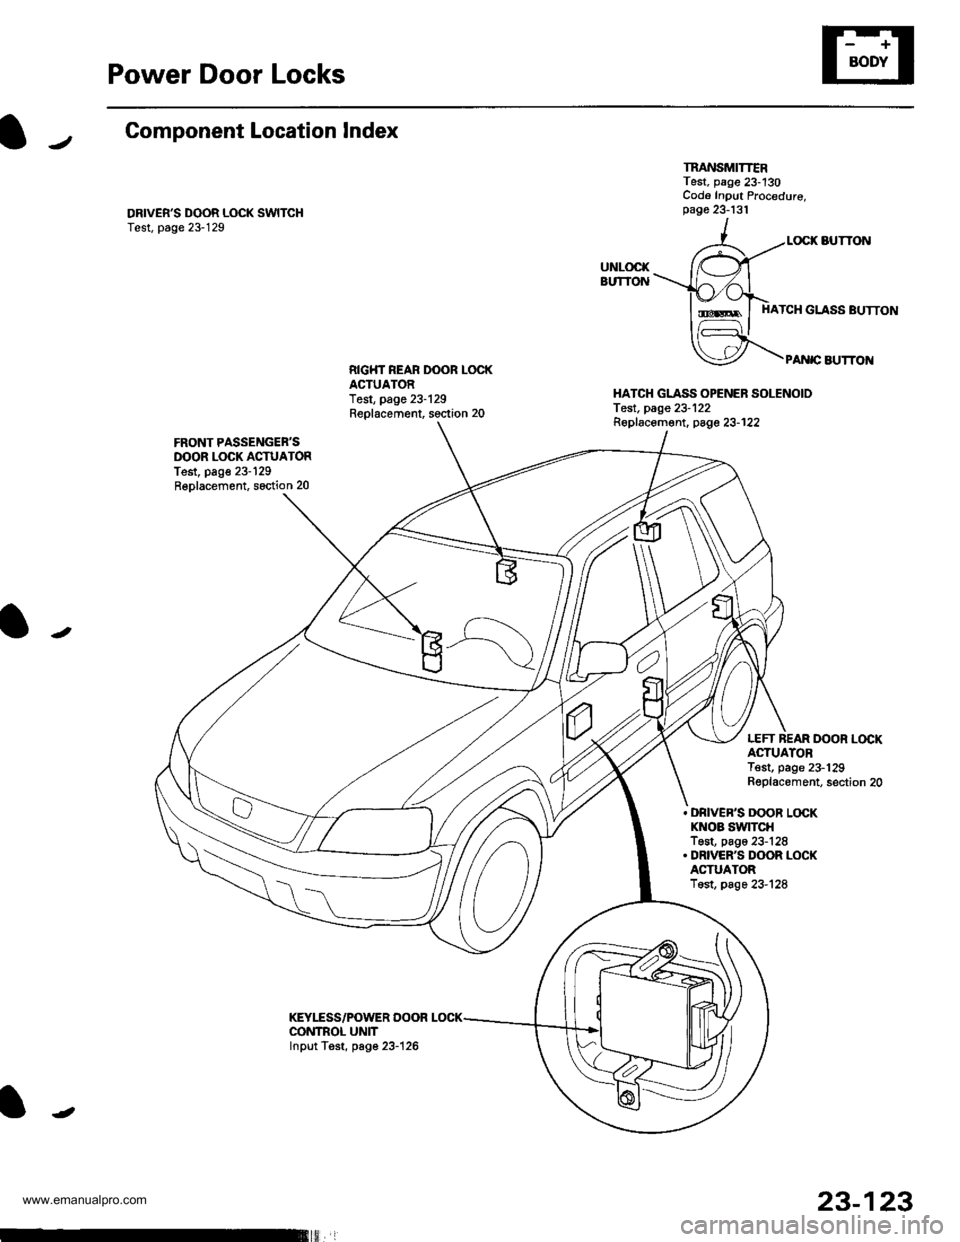 HONDA CR-V 2000 RD1-RD3 / 1.G User Guide 
Power Door Locks
Component Location lndex
DRIVERS DOOR L(rcK SWITCHTest, page 23-129
TRANSMITTERTest, page 23-130Cod6 Input Procedure,page 23-131
LOCK BUTTON
HATCH GLASS BUTTON
PA rc AUTTO]IIRIGT{T 